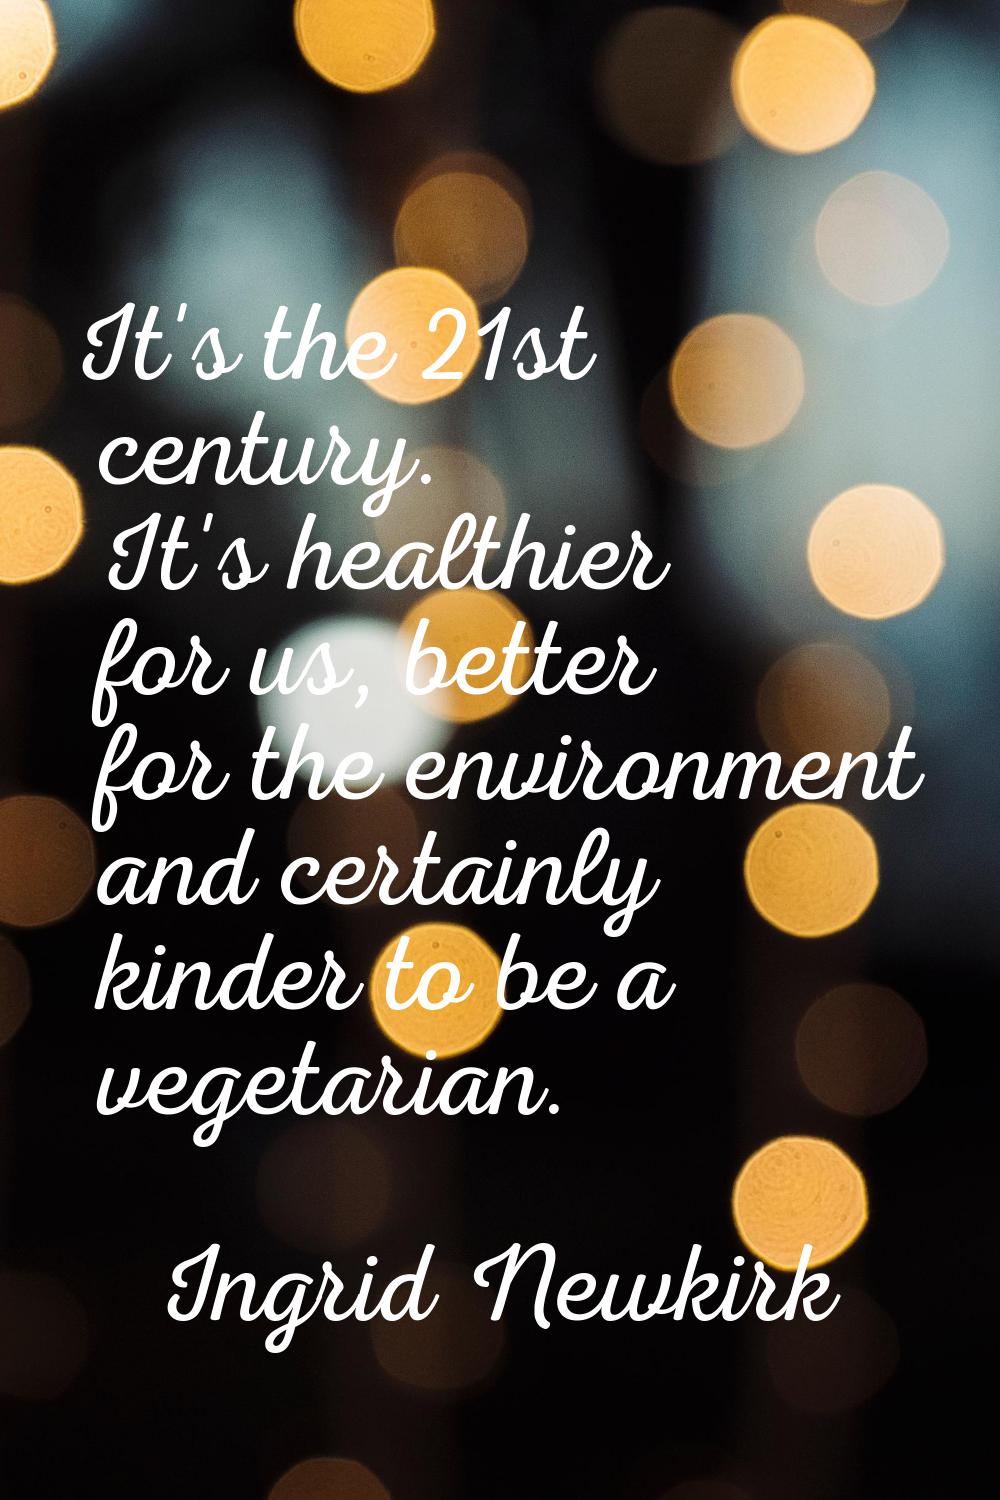 It's the 21st century. It's healthier for us, better for the environment and certainly kinder to be